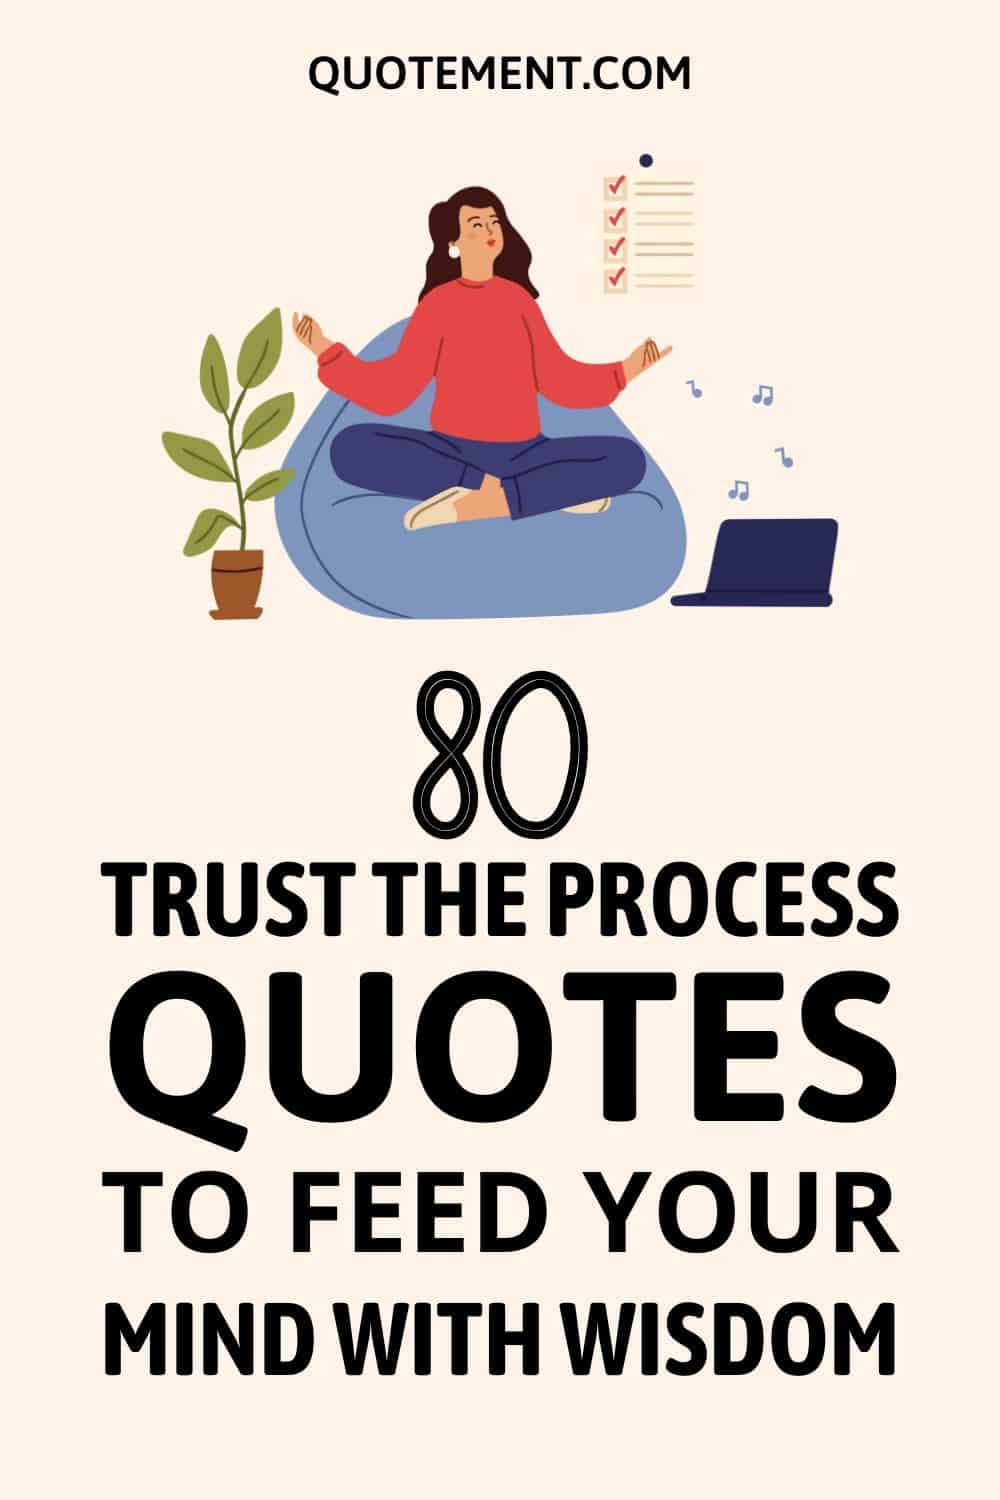 80 Trust The Process Quotes To Feed Your Mind With Wisdom
